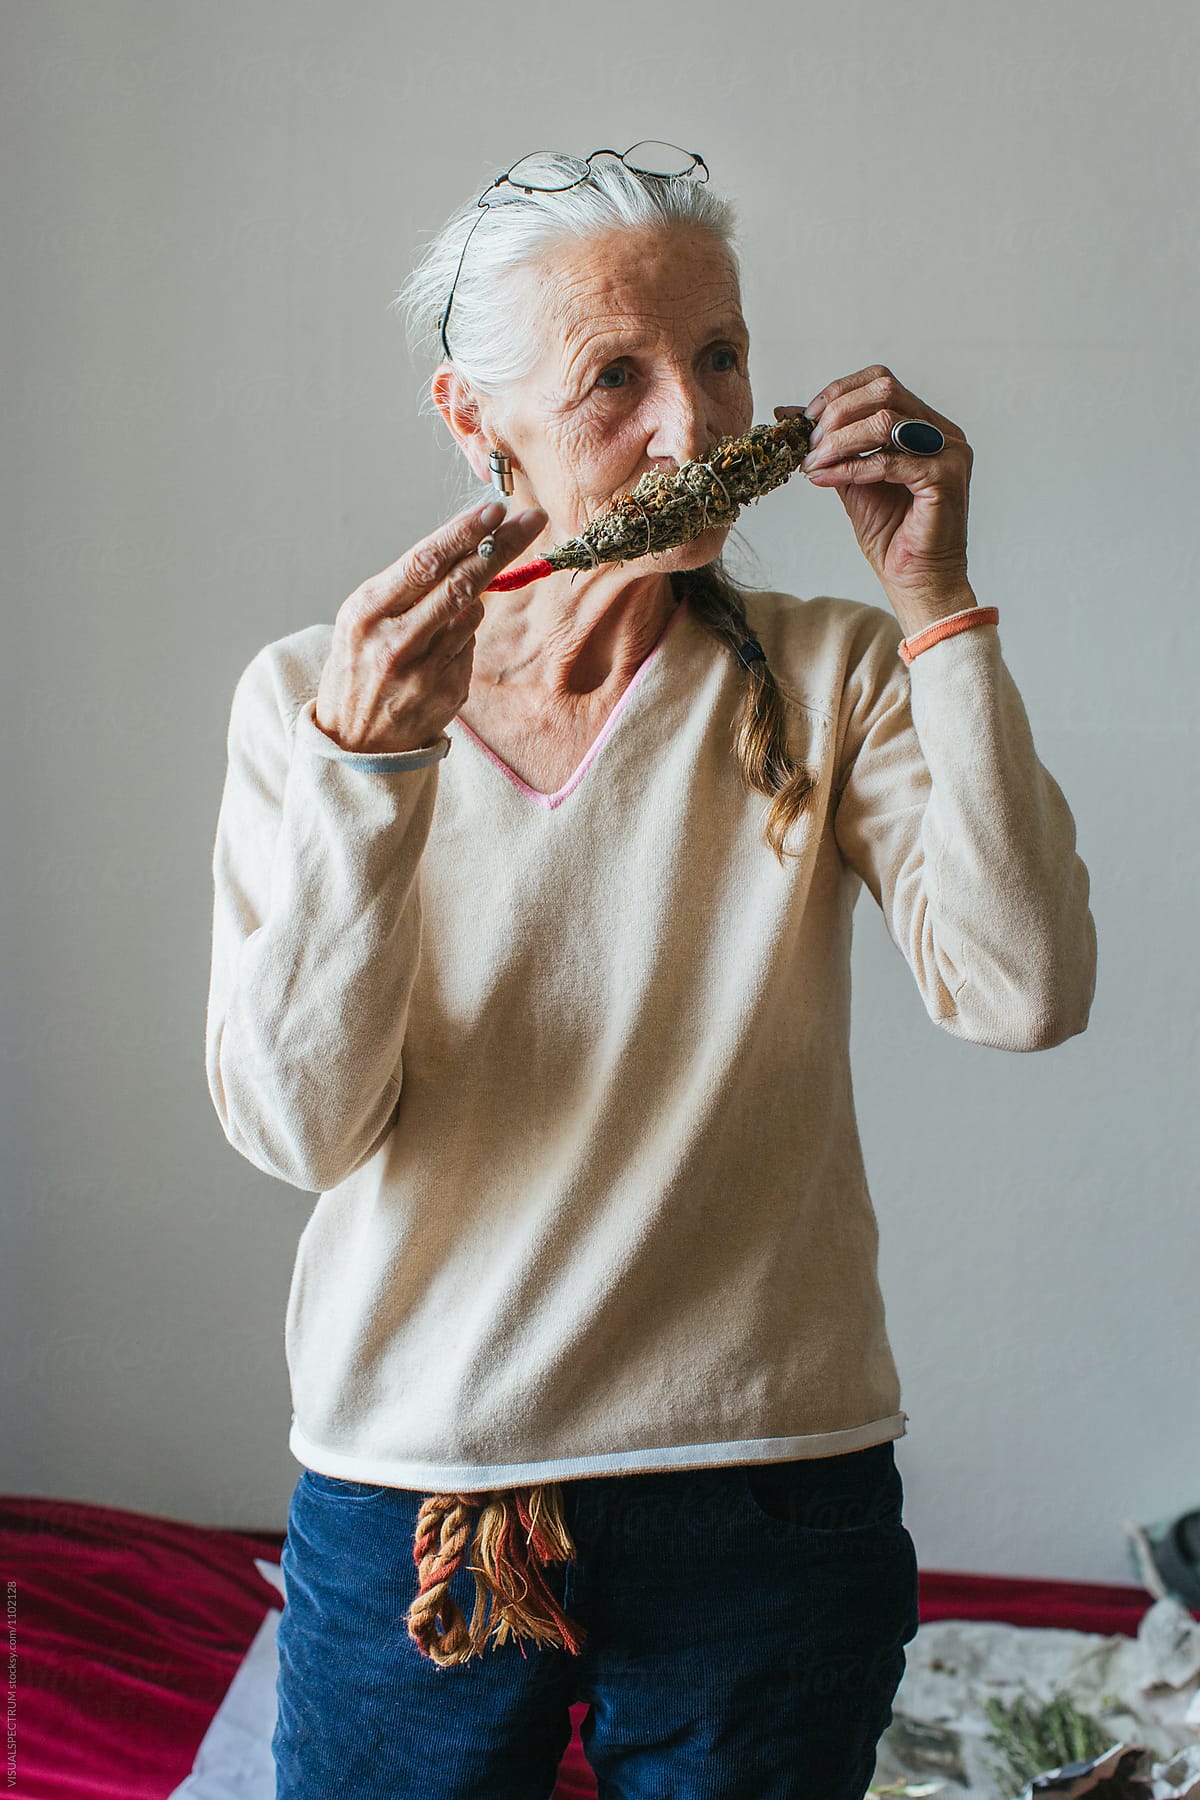 Environmental Portrait of Senior Smoking Woman with Grey Hair Smelling Smudge Stick